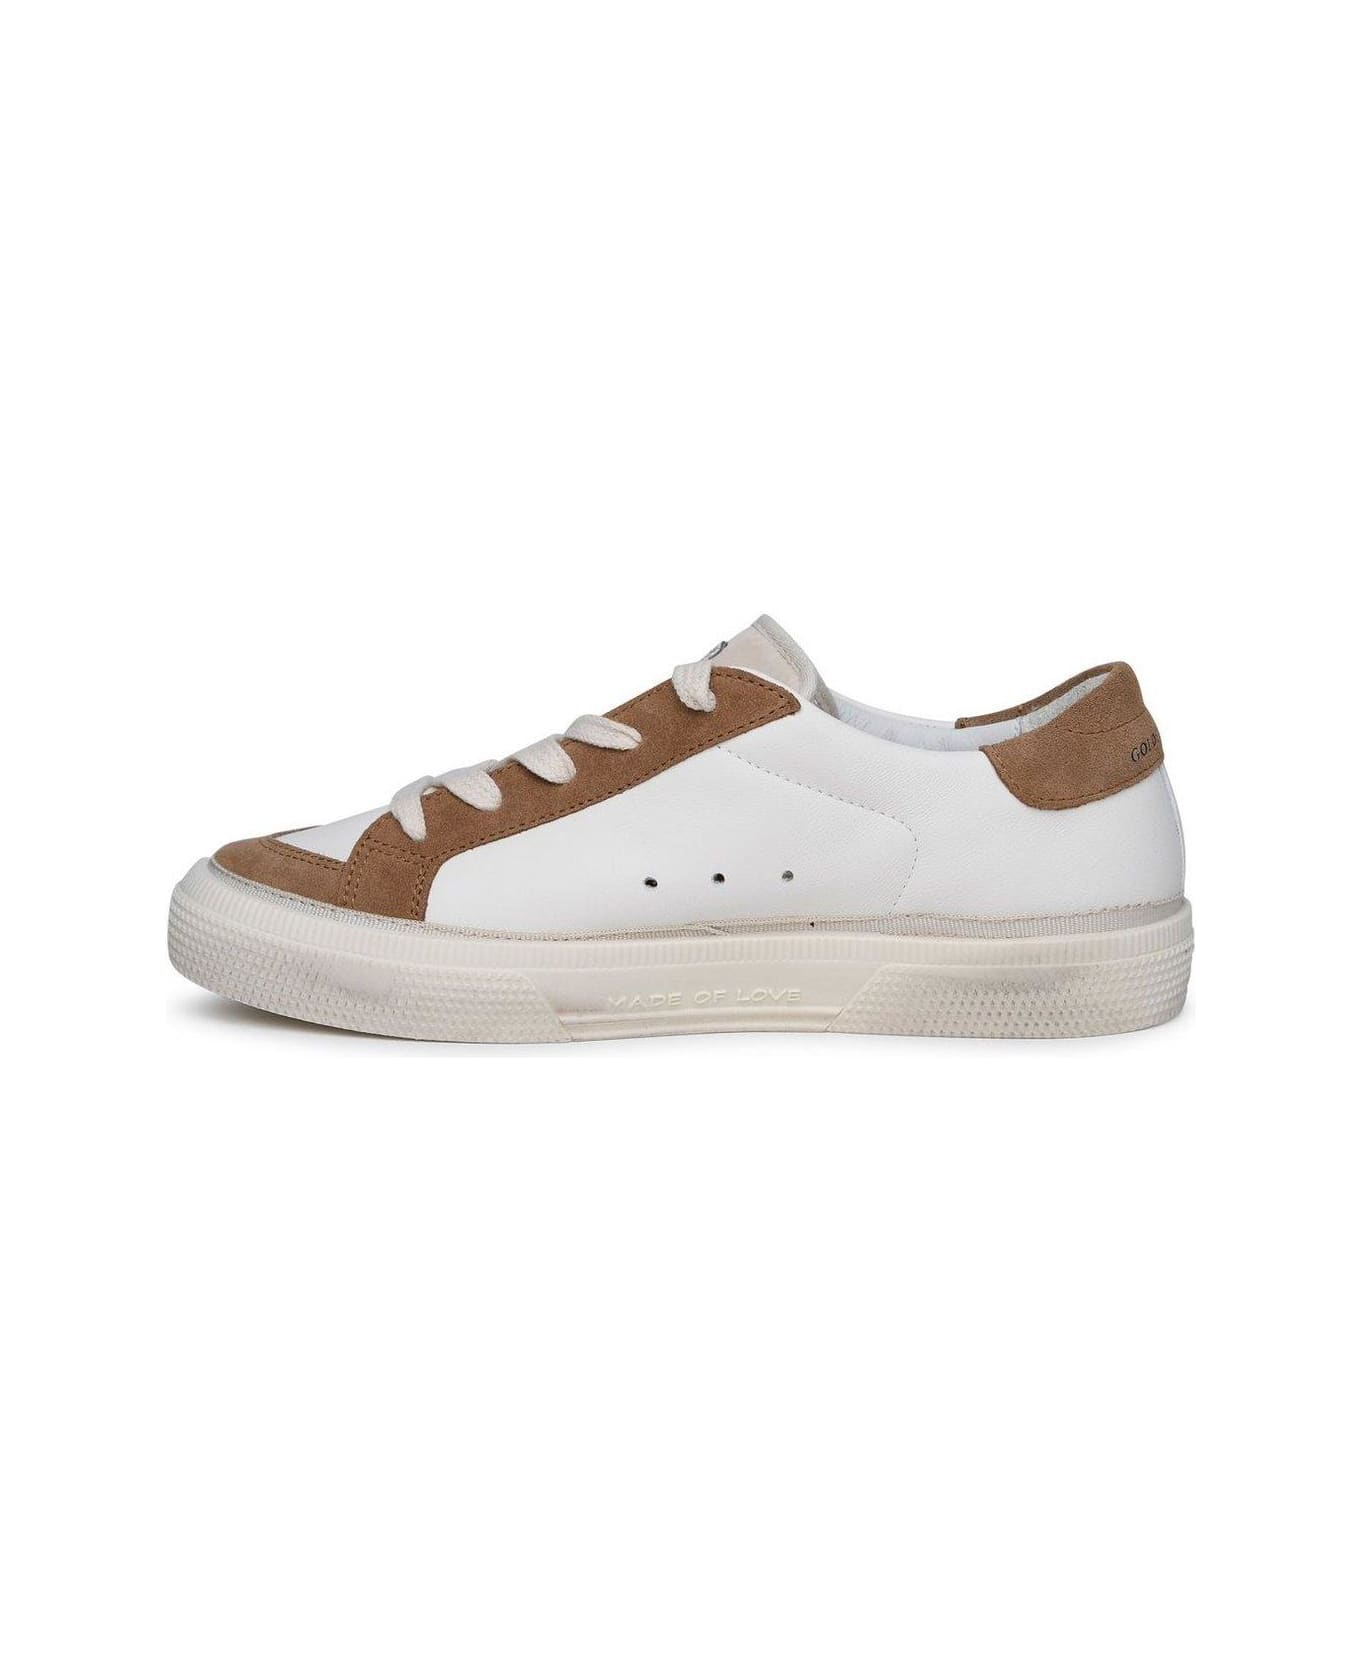 Golden Goose May Star Distressed-effect Low-top Sneakers - White/Light Brown シューズ